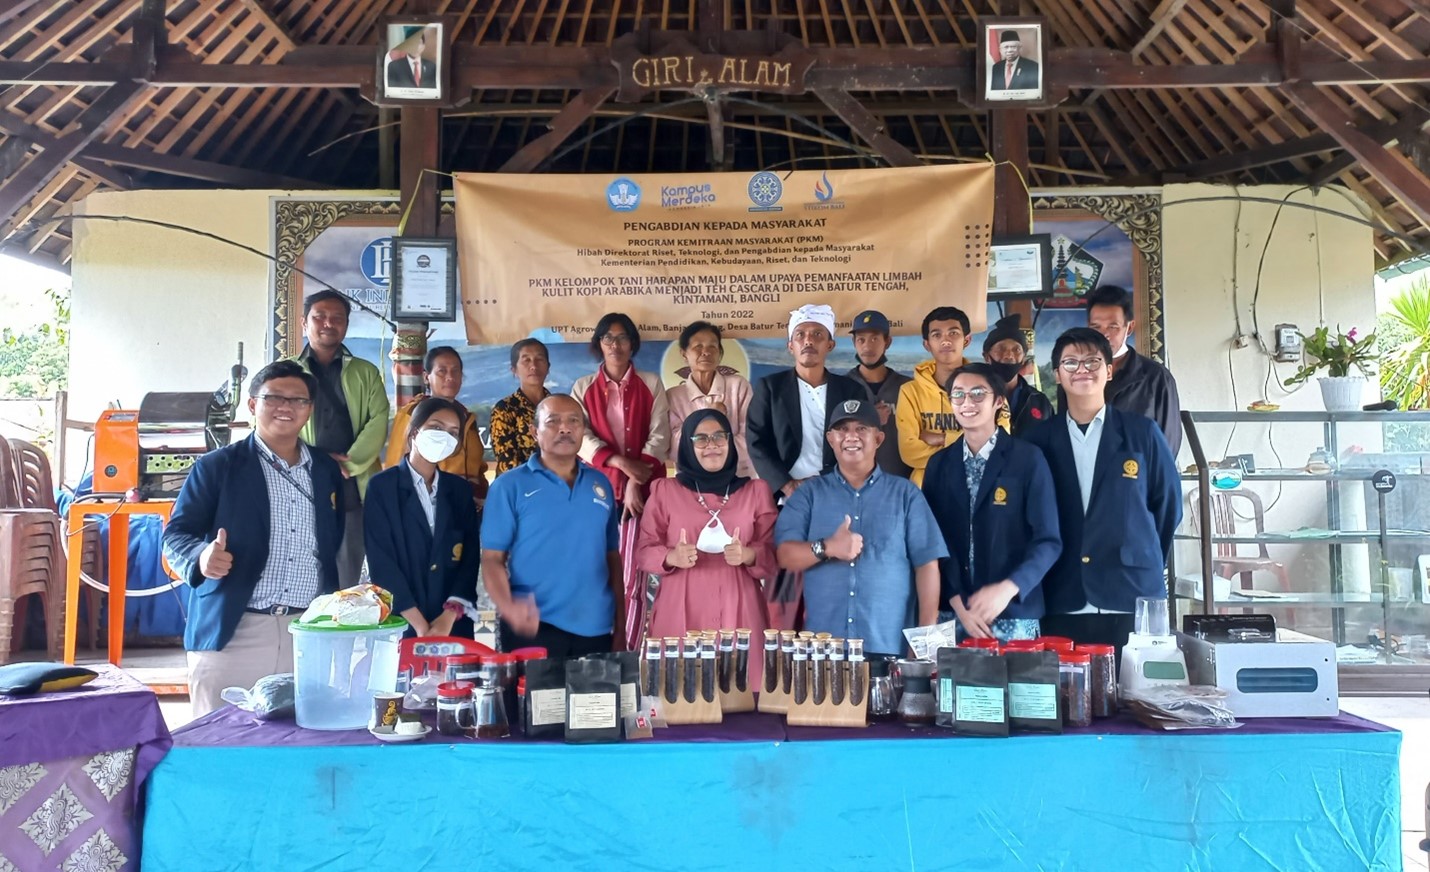 Supporting the Rise of Agrotourism in Kintamani, Lecturer of Food Technology Study Program, FTP Unud, Processing Arabica Coffee Skin Waste into Cascara Tea which is Rich in Antioxidants and with Economic Value